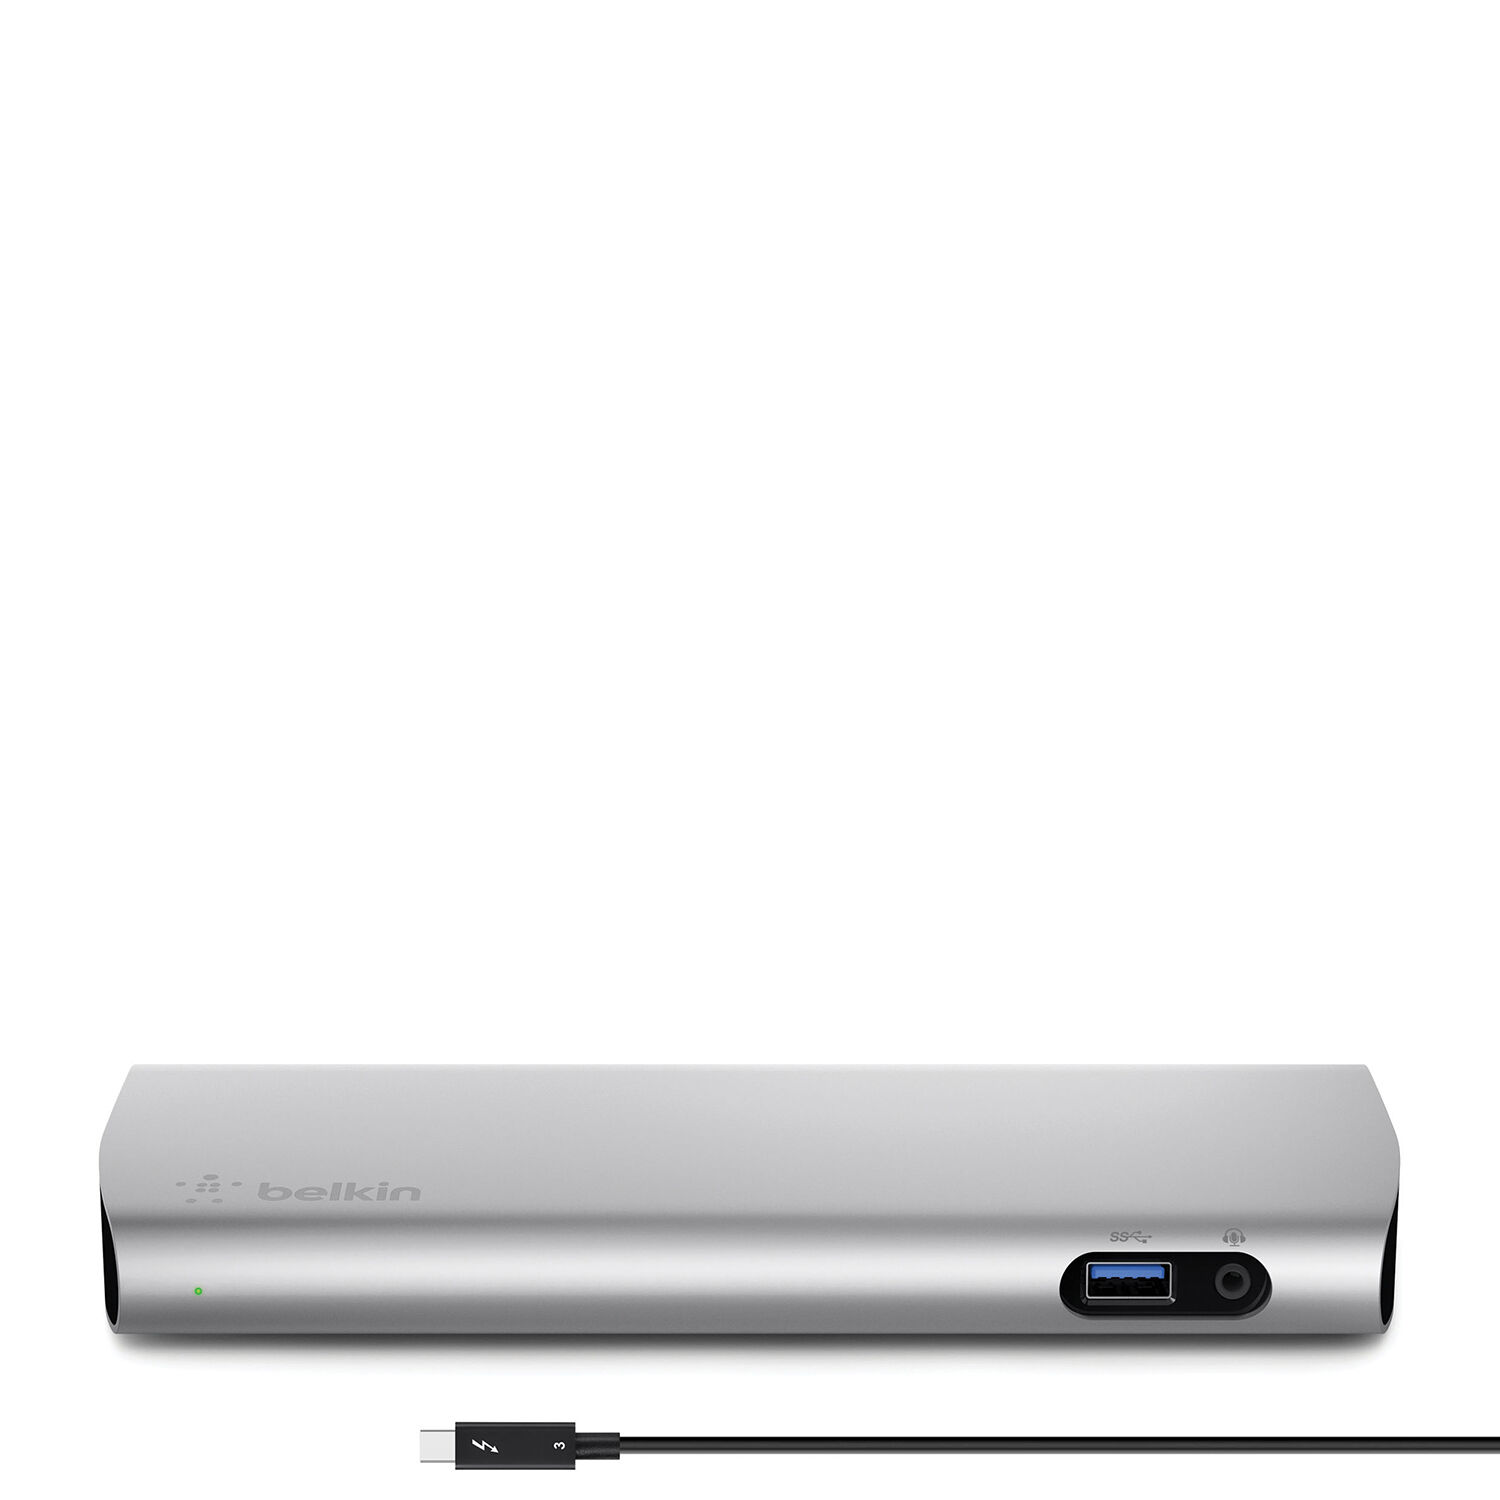 F4U095tt Belkin Thunderbolt 3 Express Dock HD with 3.3ft/1m Thunderbolt 3 Cable Designed for MacBook Pro 2016-17, 40 Gbps Transfer Rate, 85W Power Delivery, Dual 4K 60Hz Video Support 